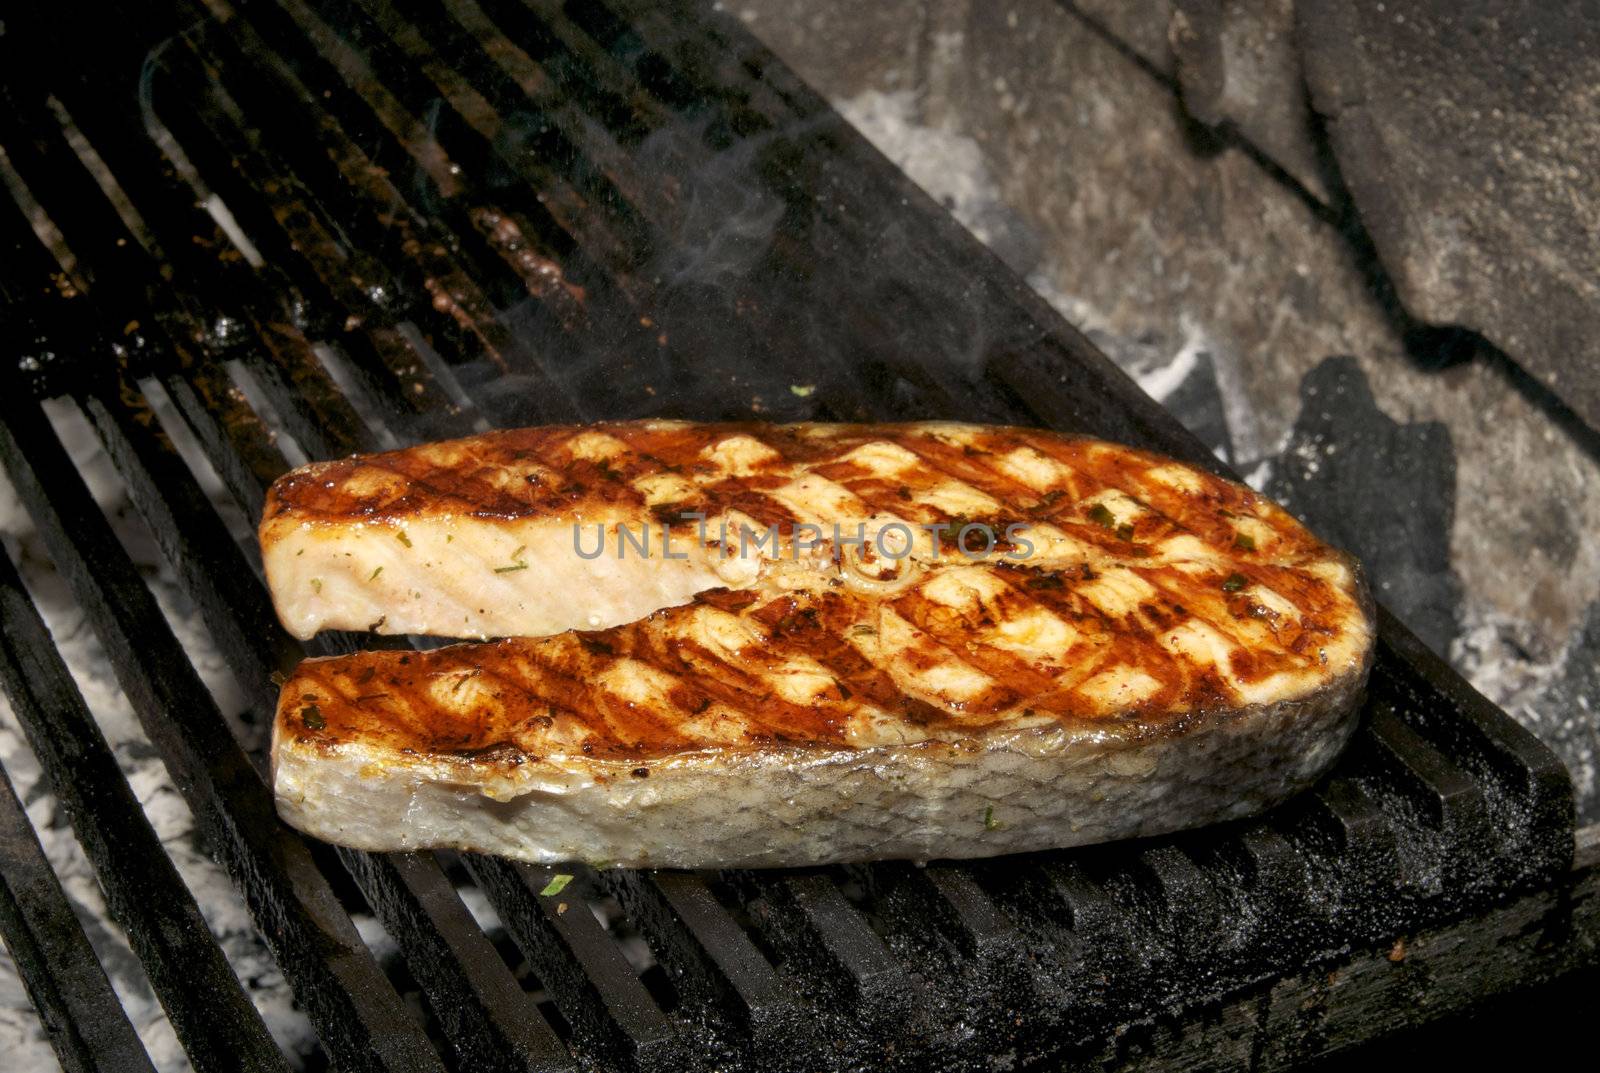 Salmon steak cooked on a grill in the restaurant